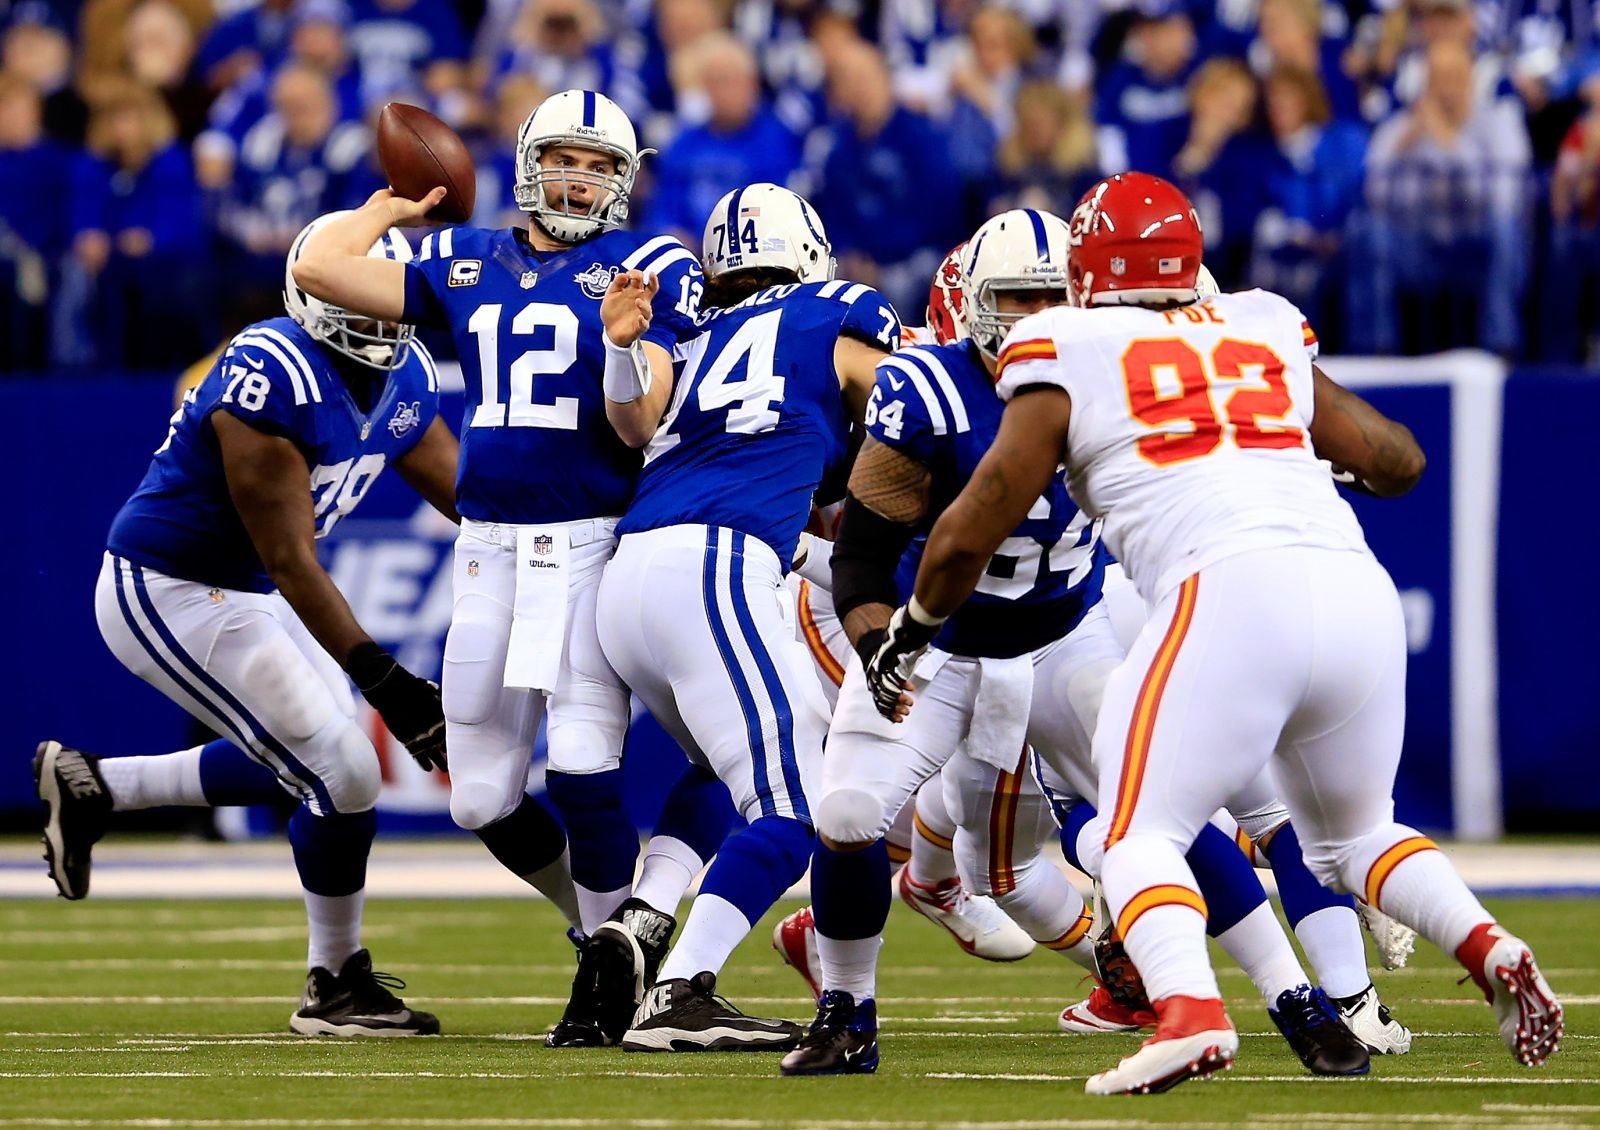 Colts Offensive Line Depth Will be Key